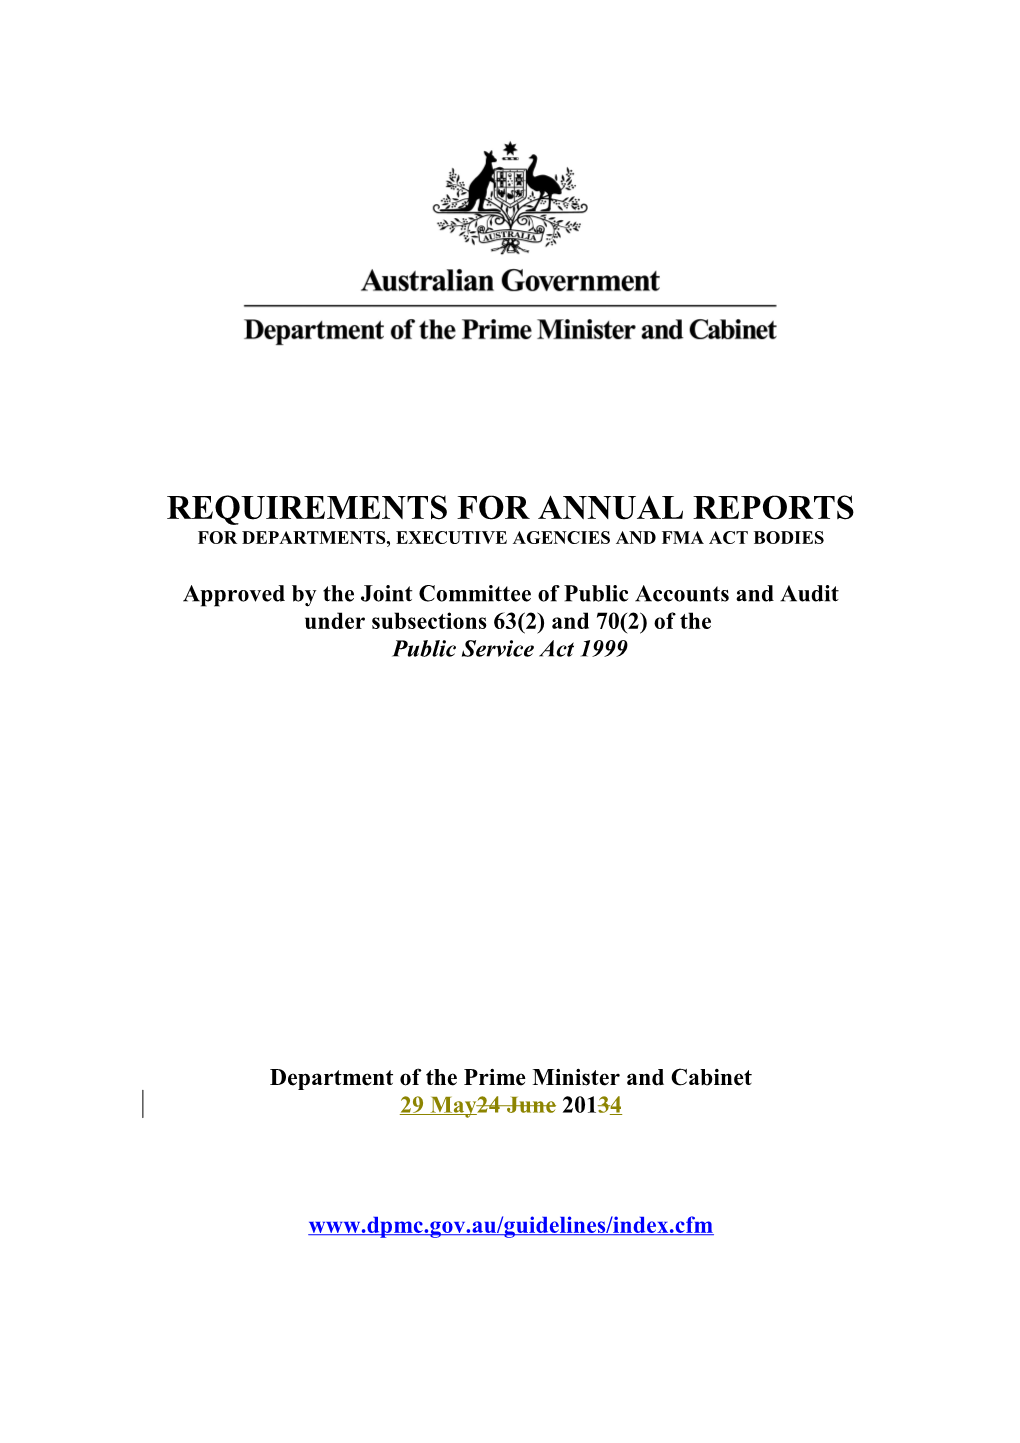 Requirements for Annual Reports for Departments, Executive Agencies and FMA Act Bodies